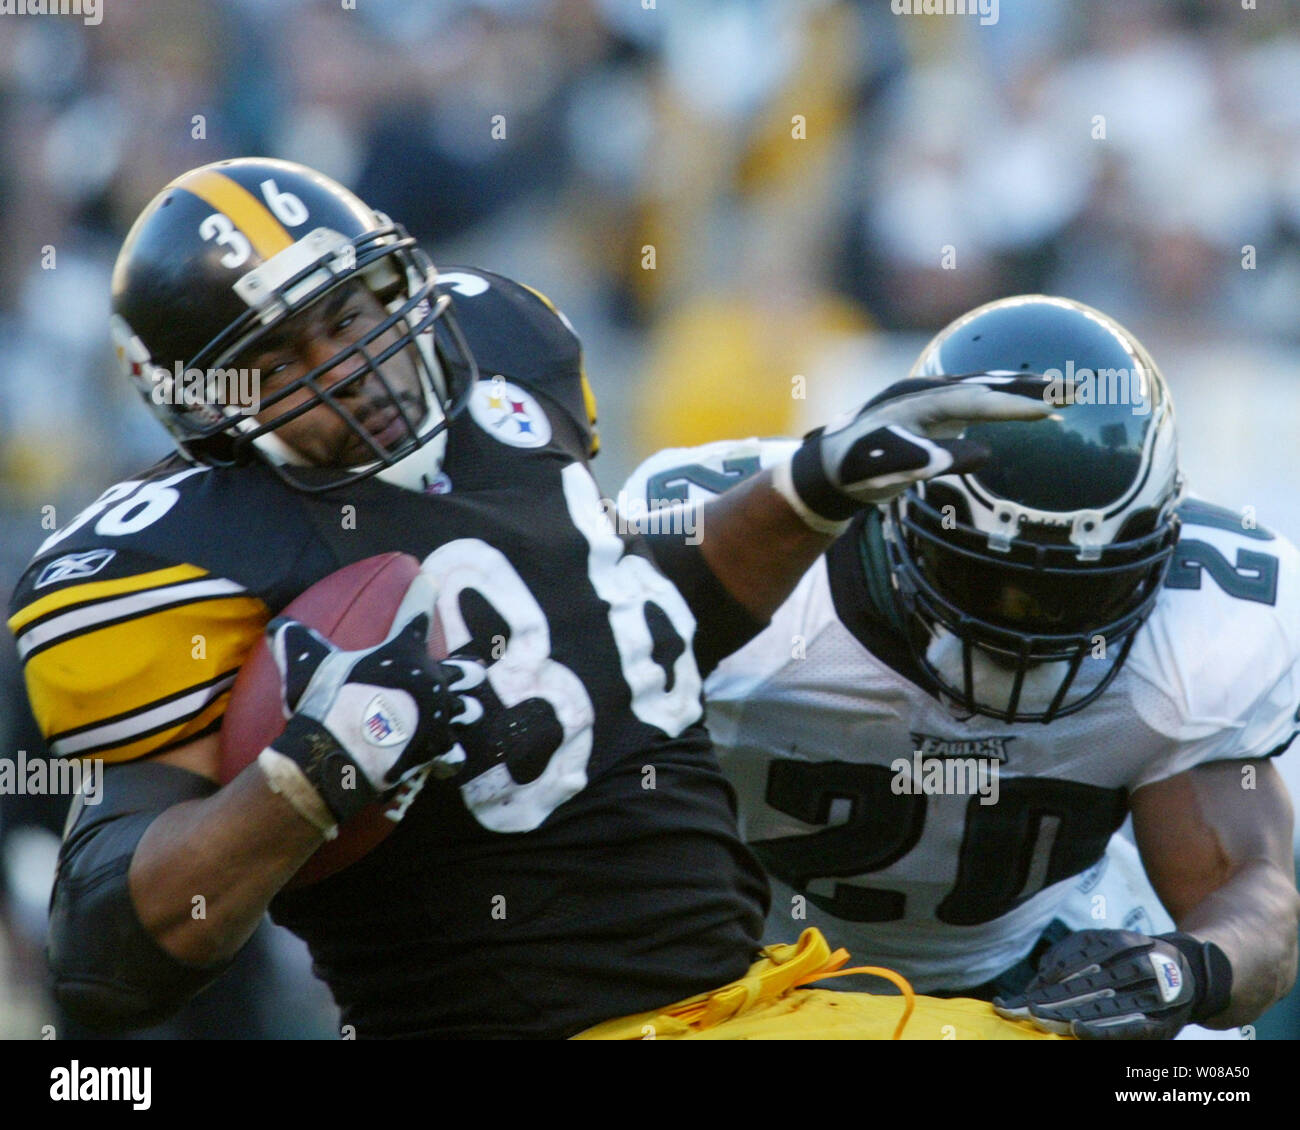 Philadelphia Eagles Brian Dawkins tries to being down Pittsburgh Steelers Jermoe Bettis during the fourth quarter   at Heinz Field in Pittsburgh, Pennsylvania, on November 7, 2004. The Steelers went on to defeat the Eagles 27 to 3, and end the Eagles winning streak.     (UPI Photo/Stephen M. Gross) Stock Photo